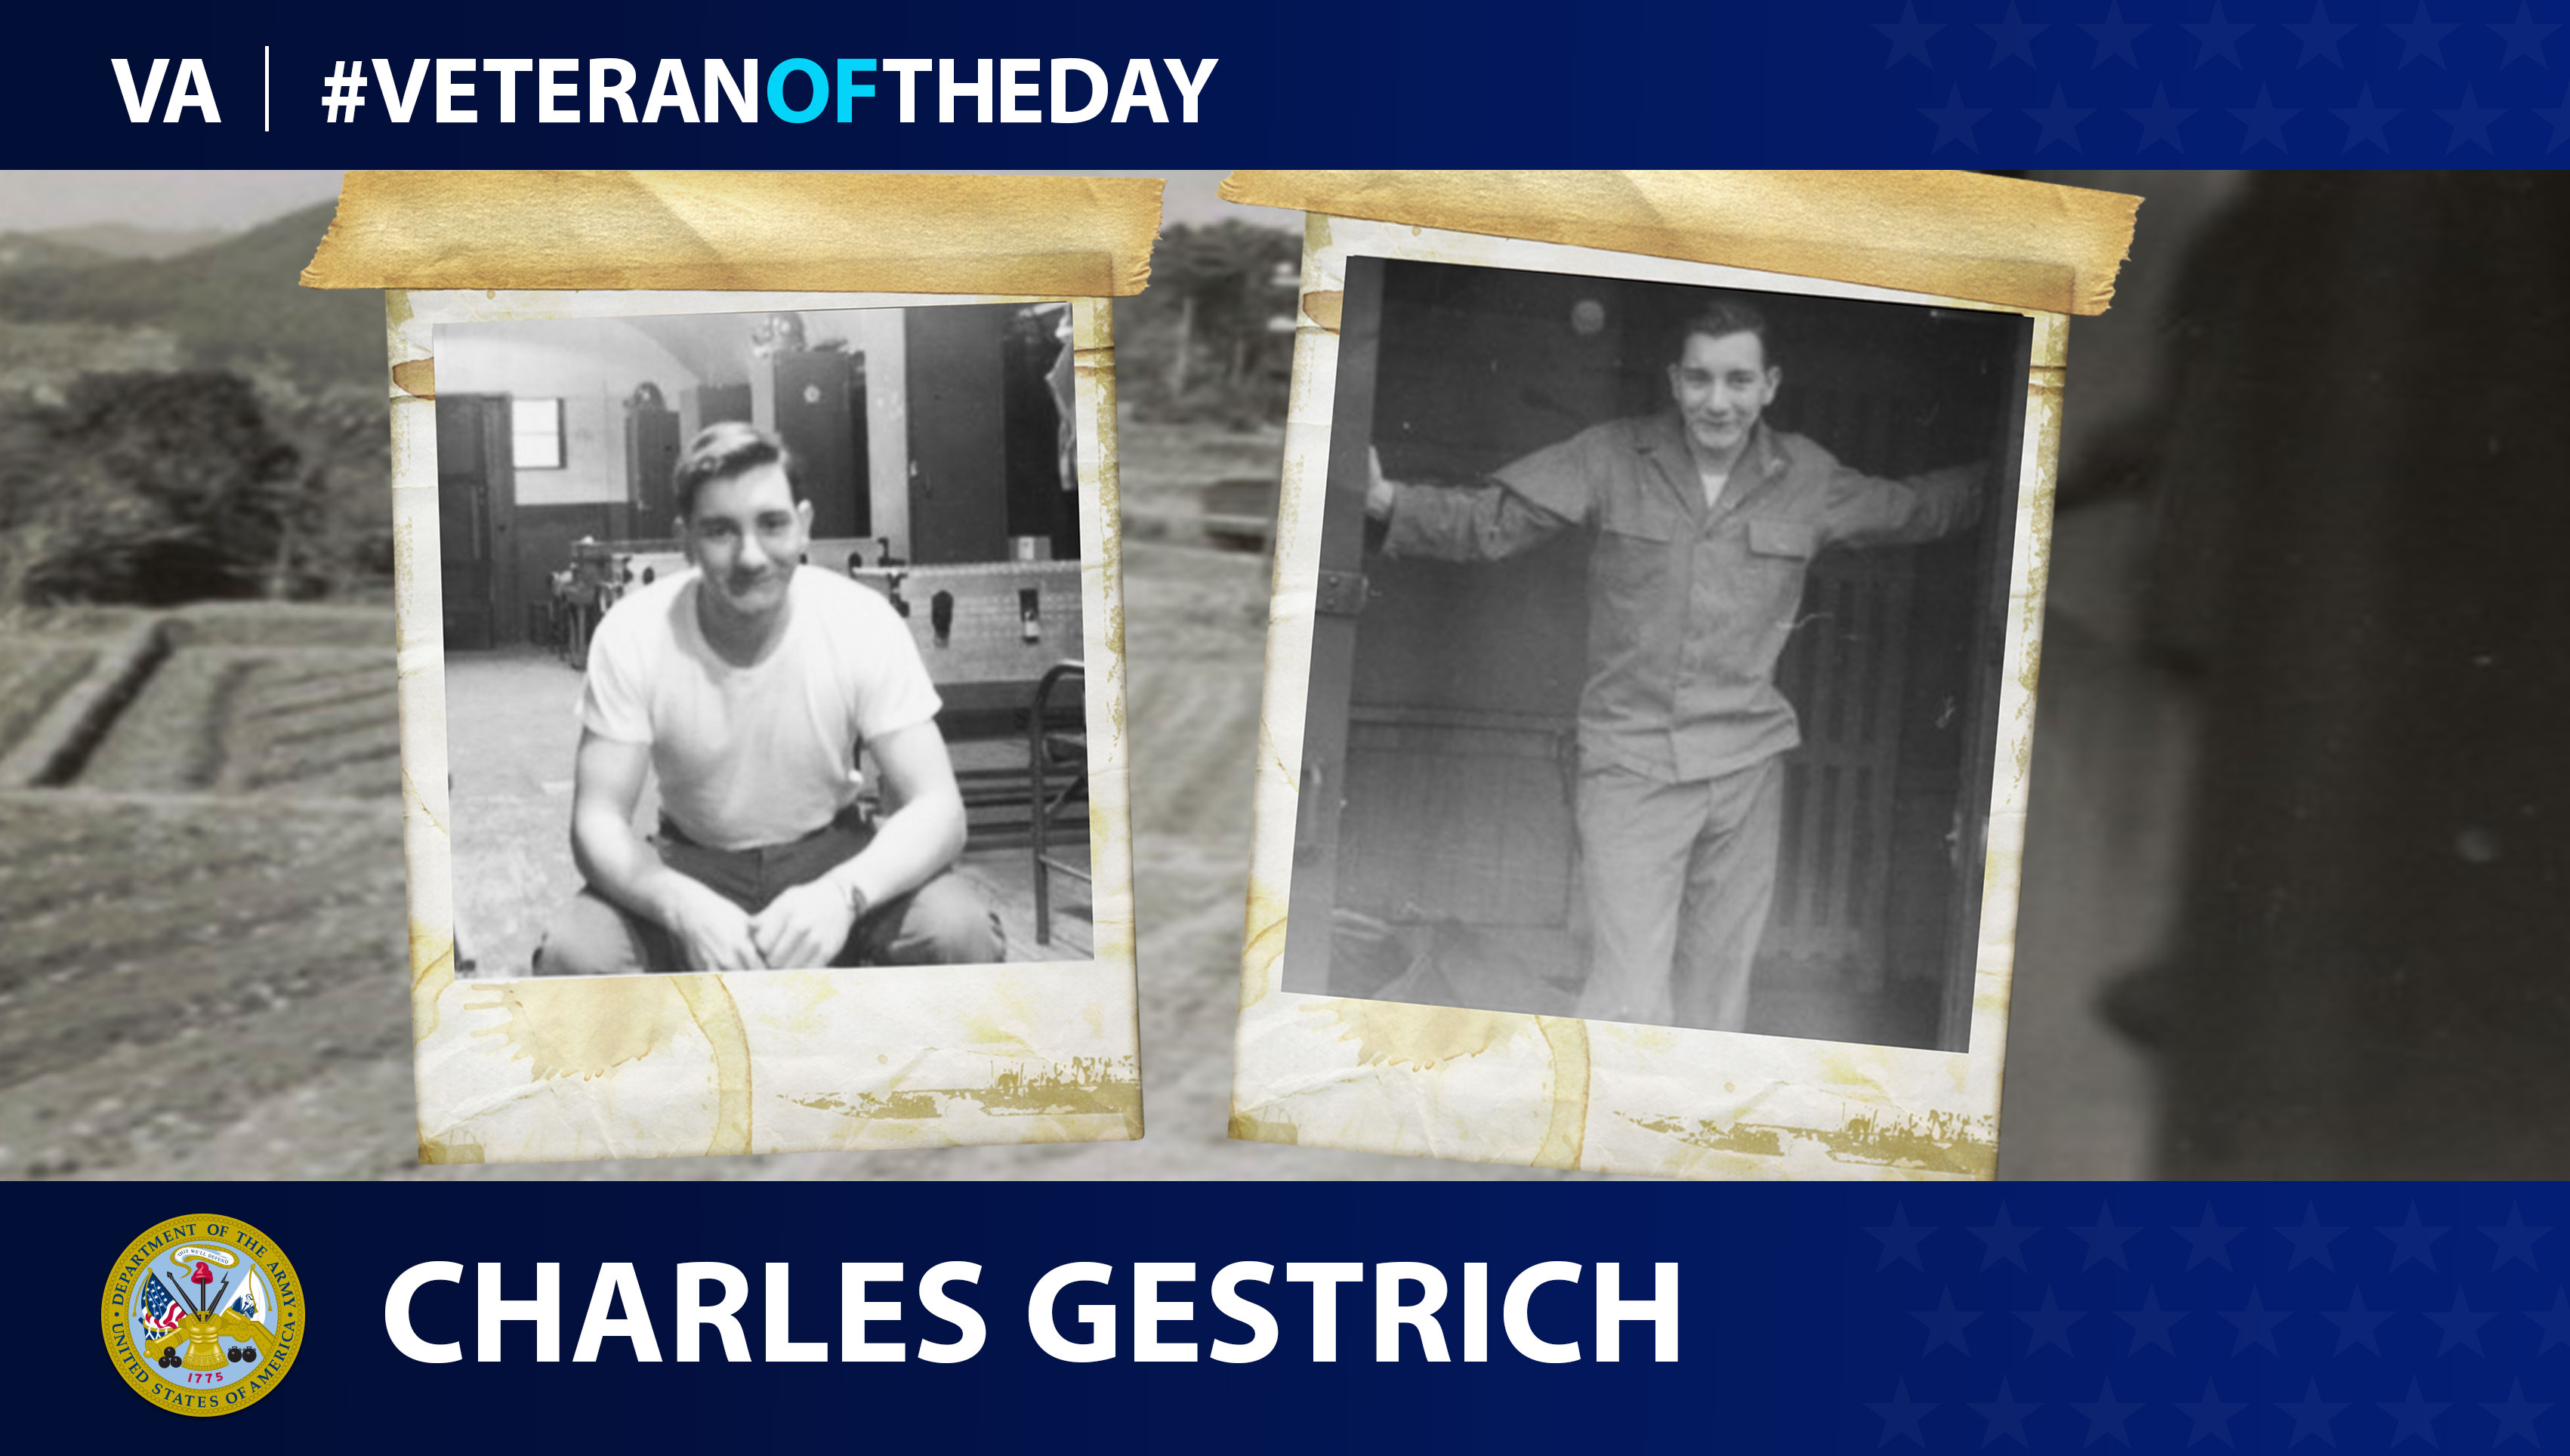 Army Veteran Charles J. Gestrich is today's Veteran of the Day.